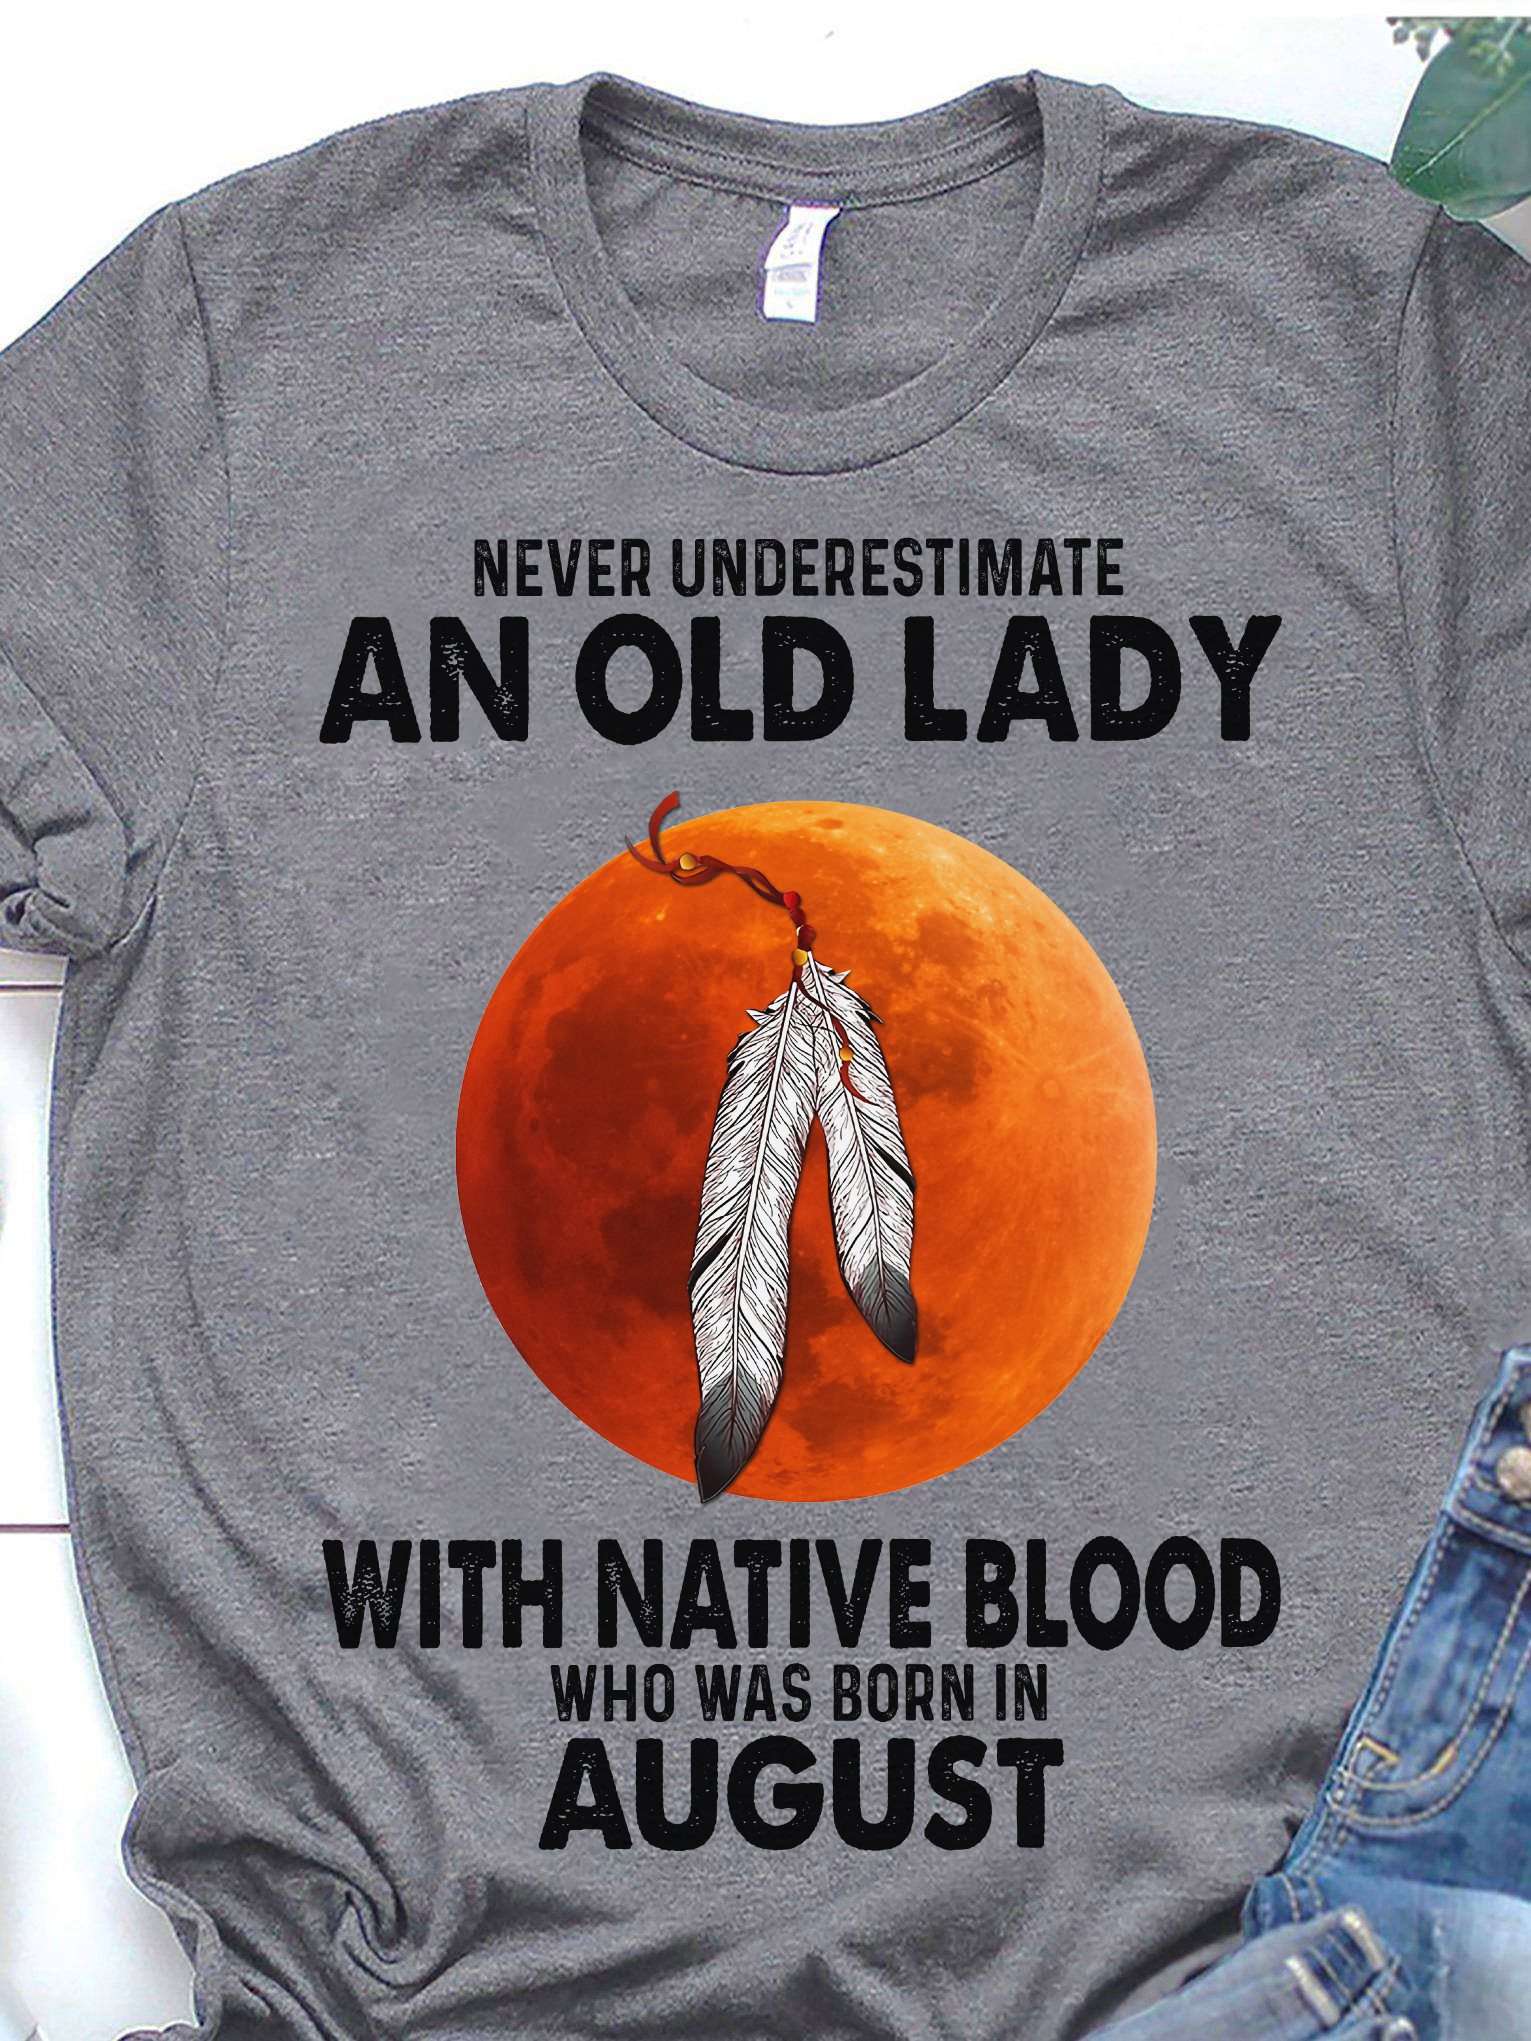 Never underestimate an old lady with Native blood who was born in August - Old Native American